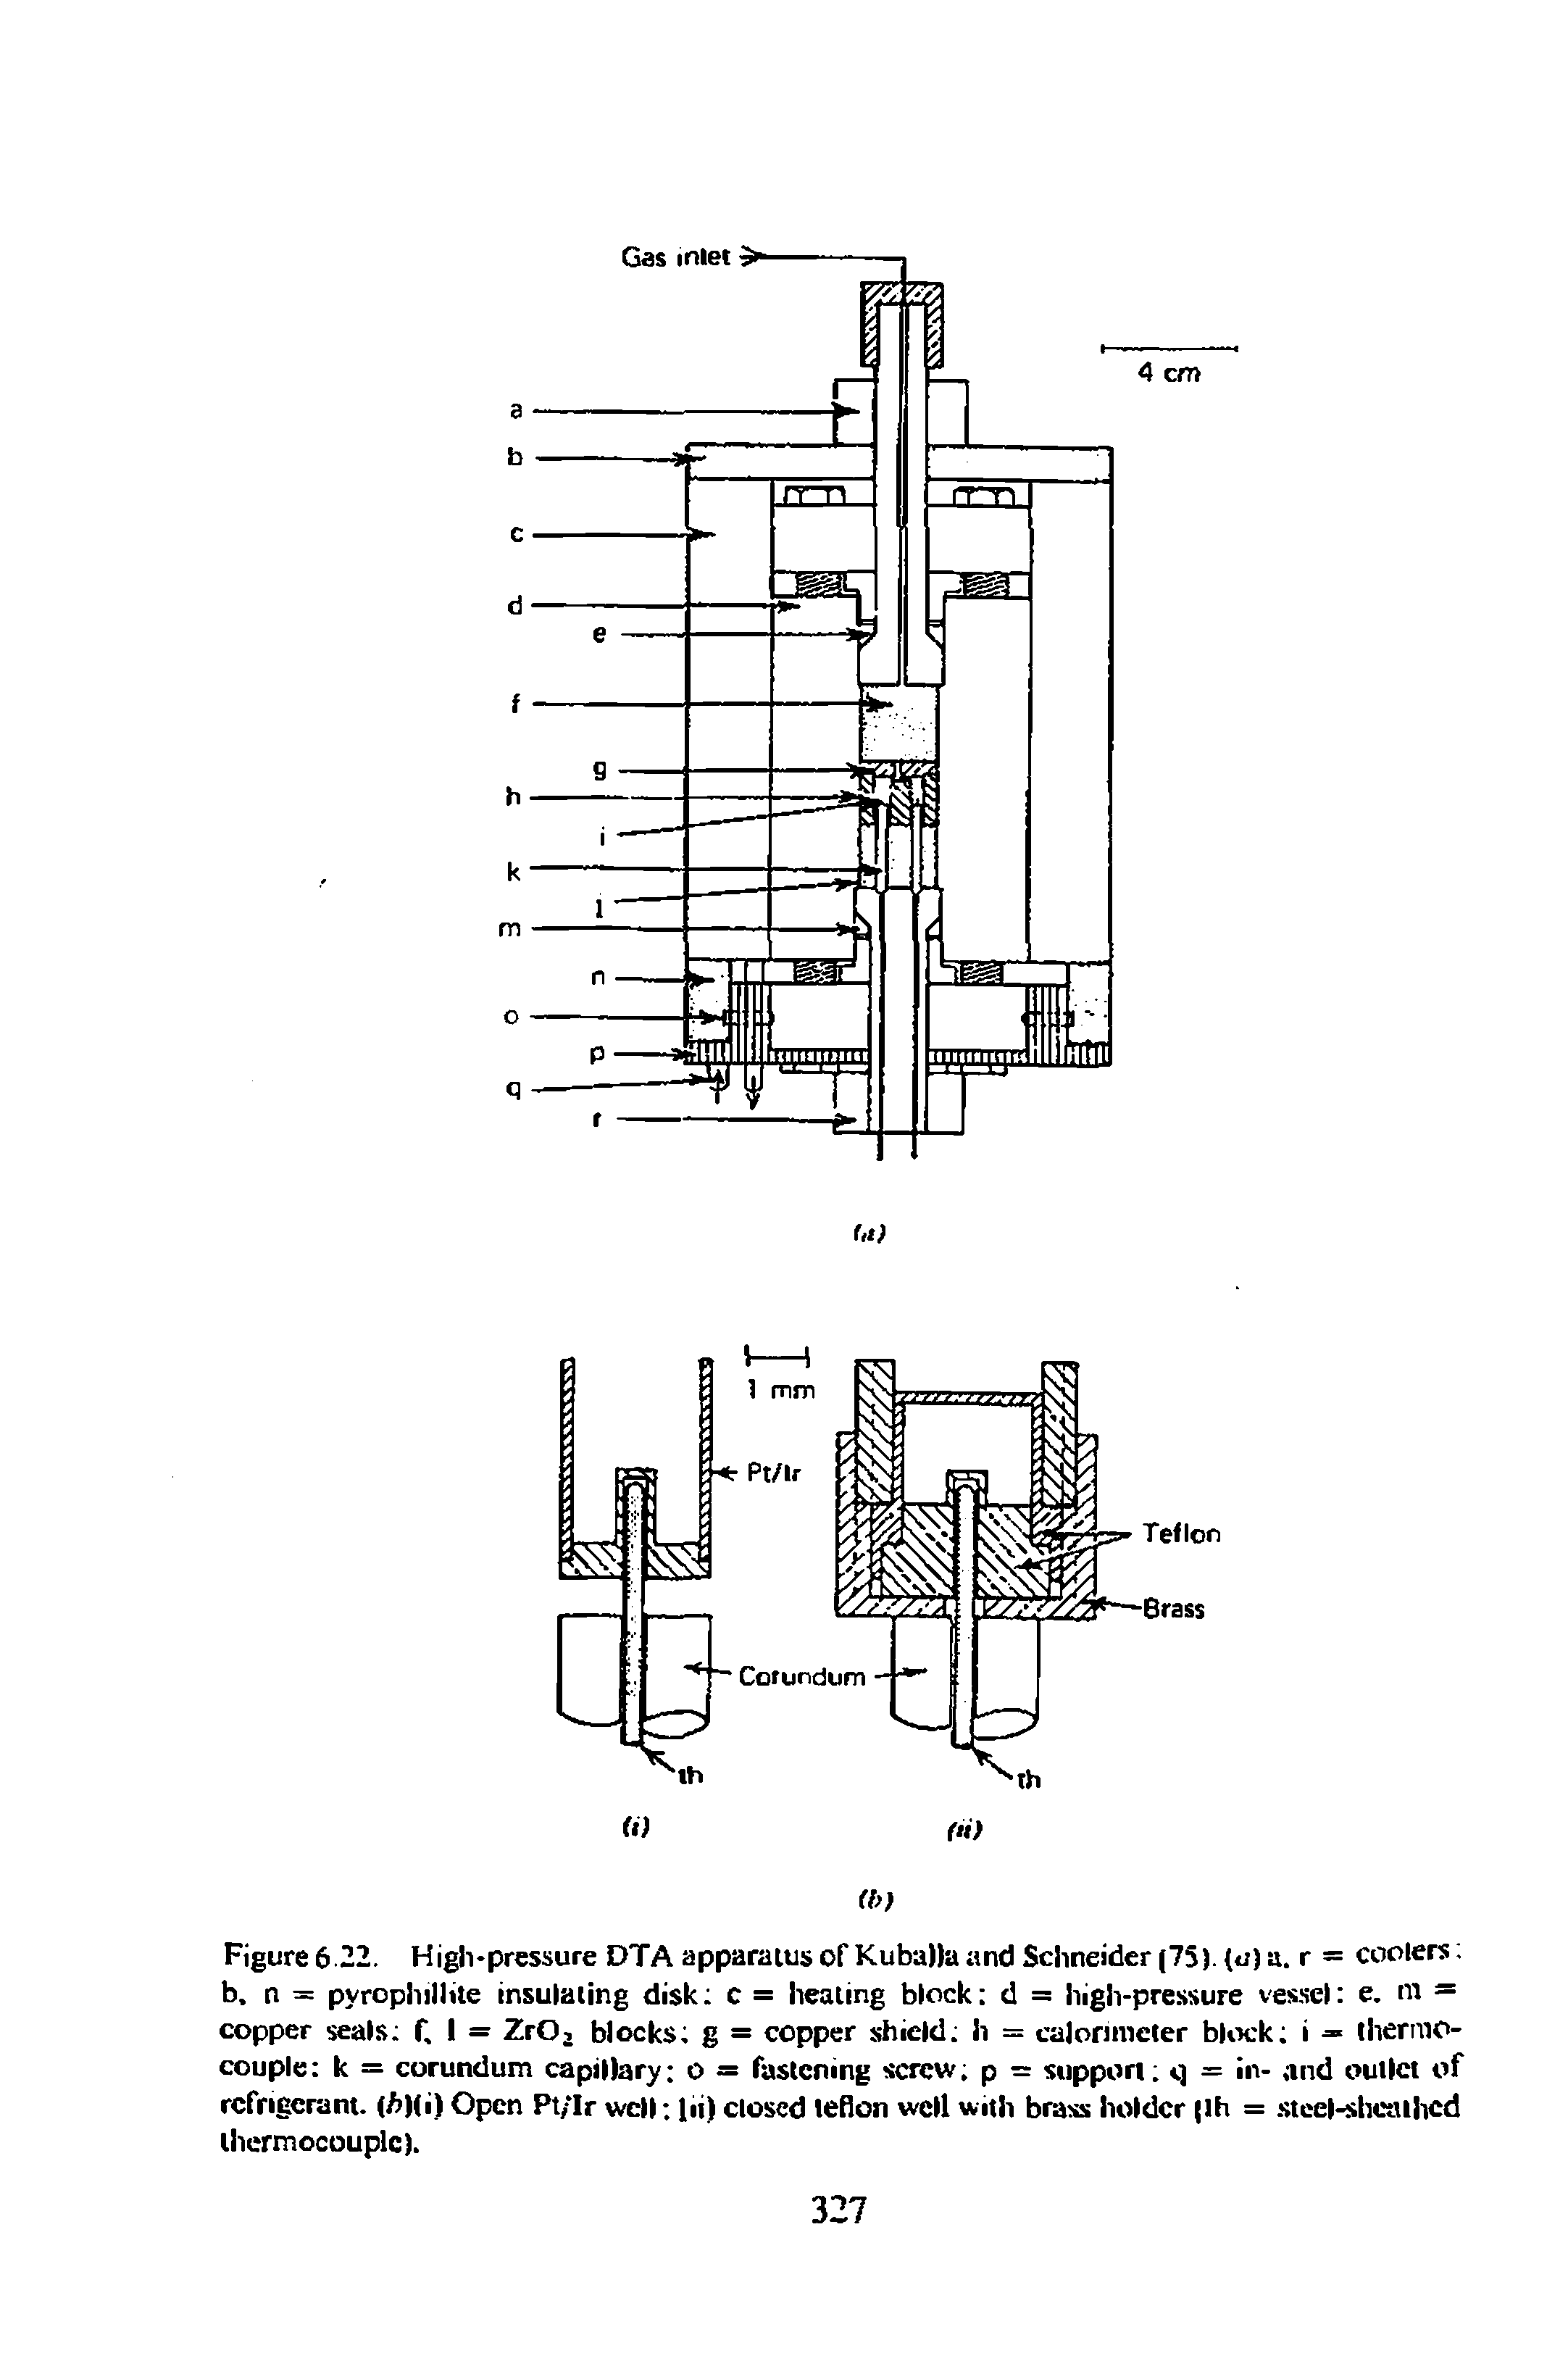 Figure 6 22. High-pressure DTA apparatus of KubaMa and Schneider (75). (u) a. r = coolers. b, n = pyrophillite insulating disk c = heating block d = high-pressure vessel e. m — copper seals f, I = Zr02 blocks g = copper shield h = calorimeter block i = thermocouple k = corundum capillary o = fastening screw p = support c] = in- and outlet of refrigerant. (/ )(i) Open Pt/Ir well In) closed teflon well with brass holder lh = steel-sheathed thermocouple).